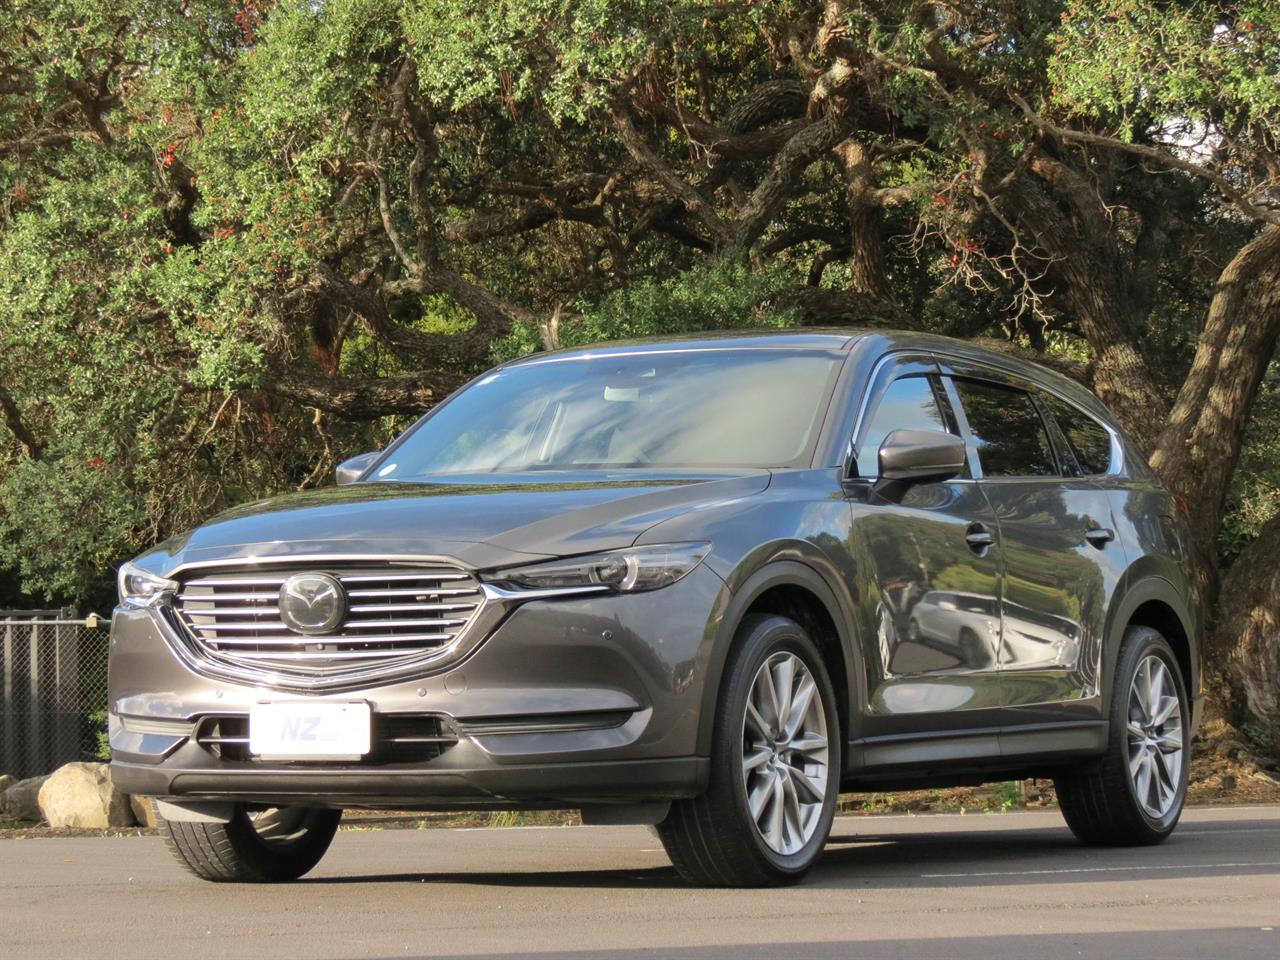 2018 Mazda CX-8 only $105 weekly